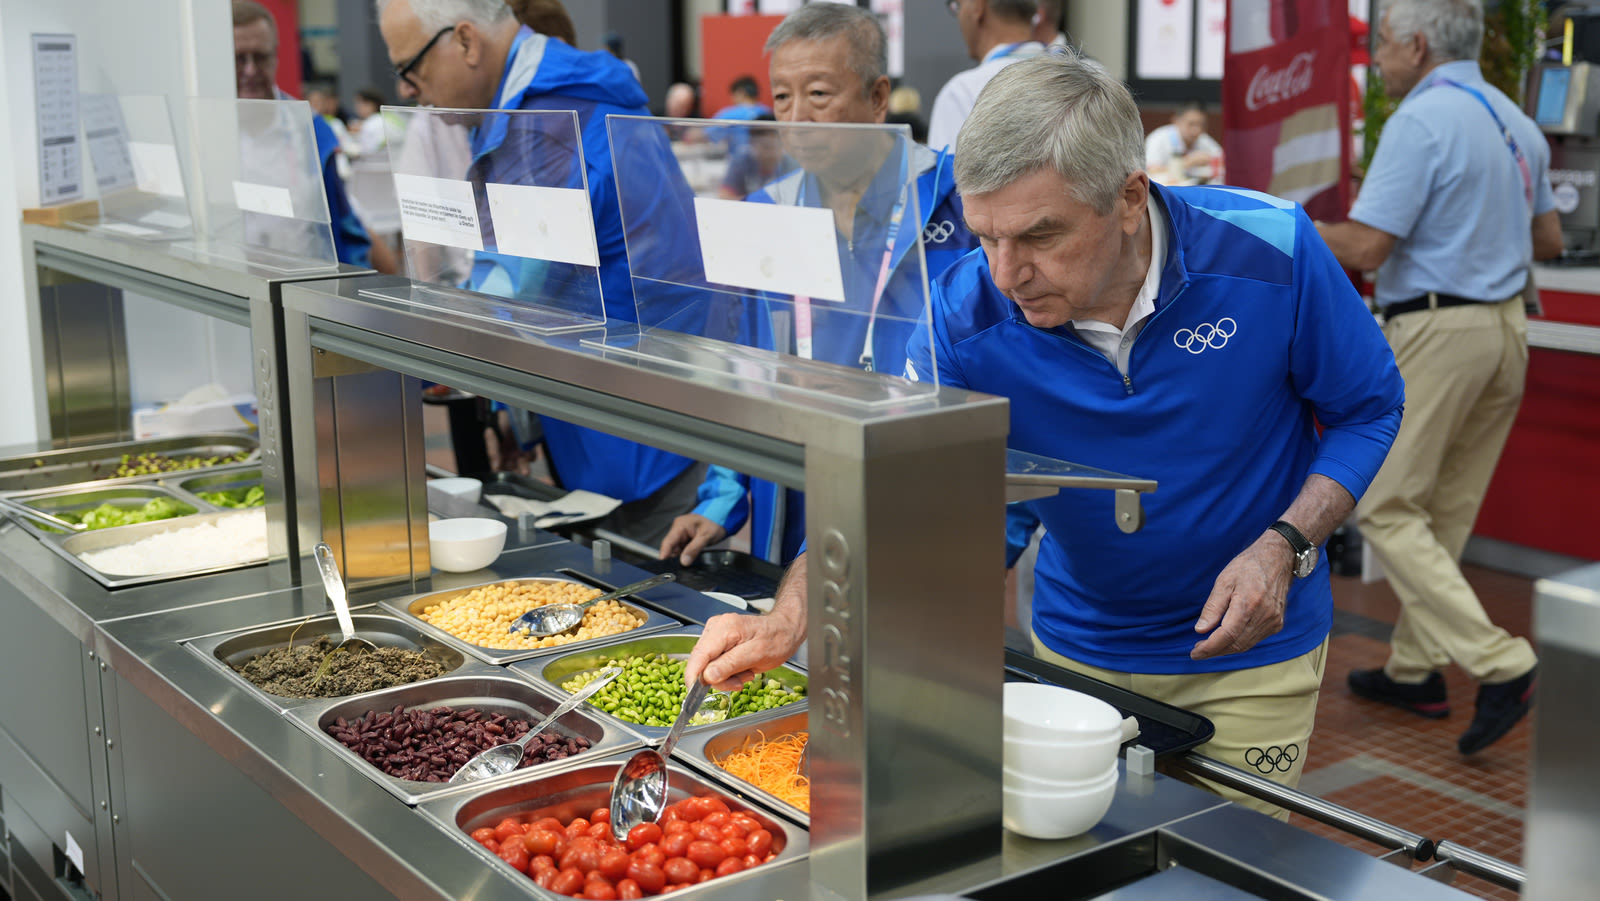 After A Slew Of Complaints, The Olympic Village Is Finally Getting More Food